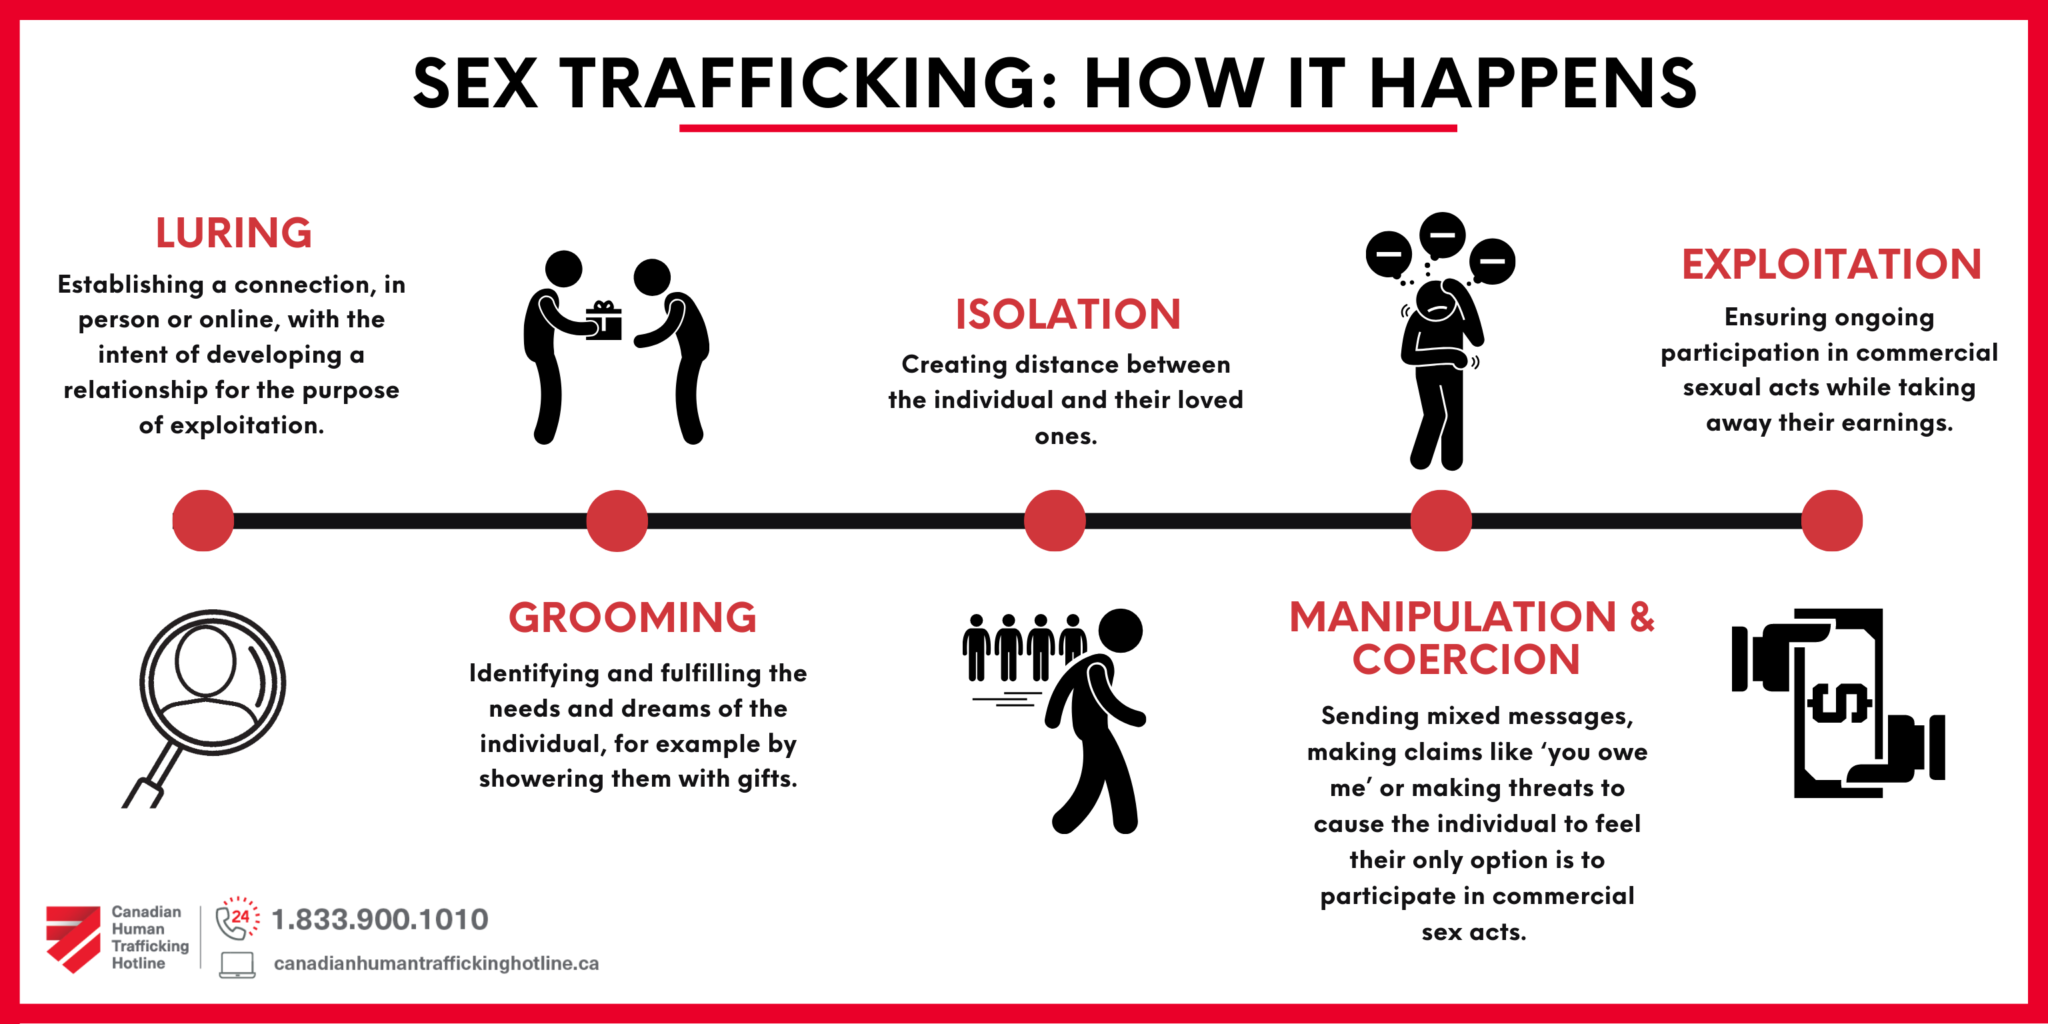 Myths Facts And Alternatives For Sex Trafficking Imagery The Hot Sex Picture